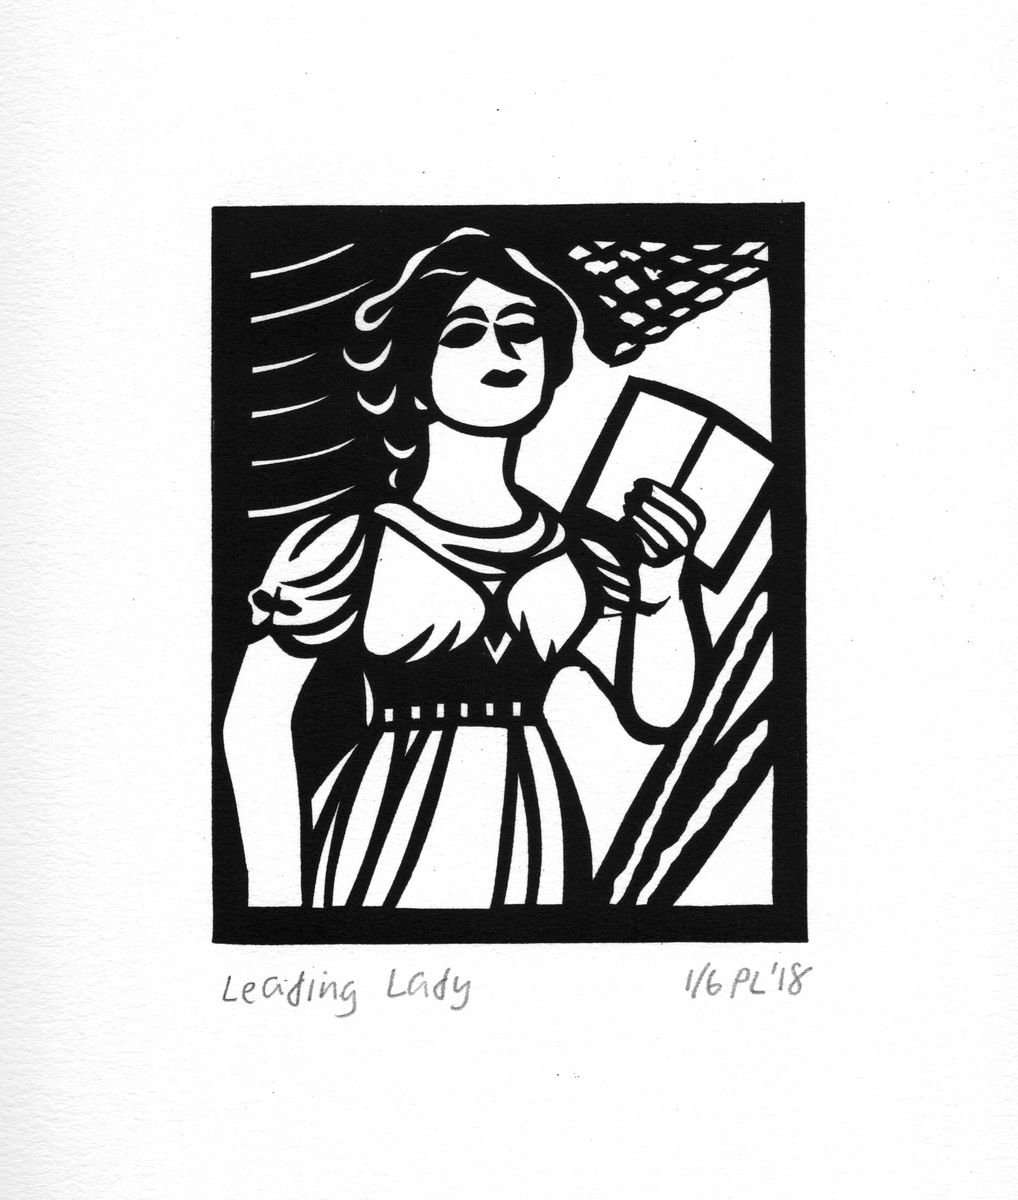 Leading Lady by Peter Long